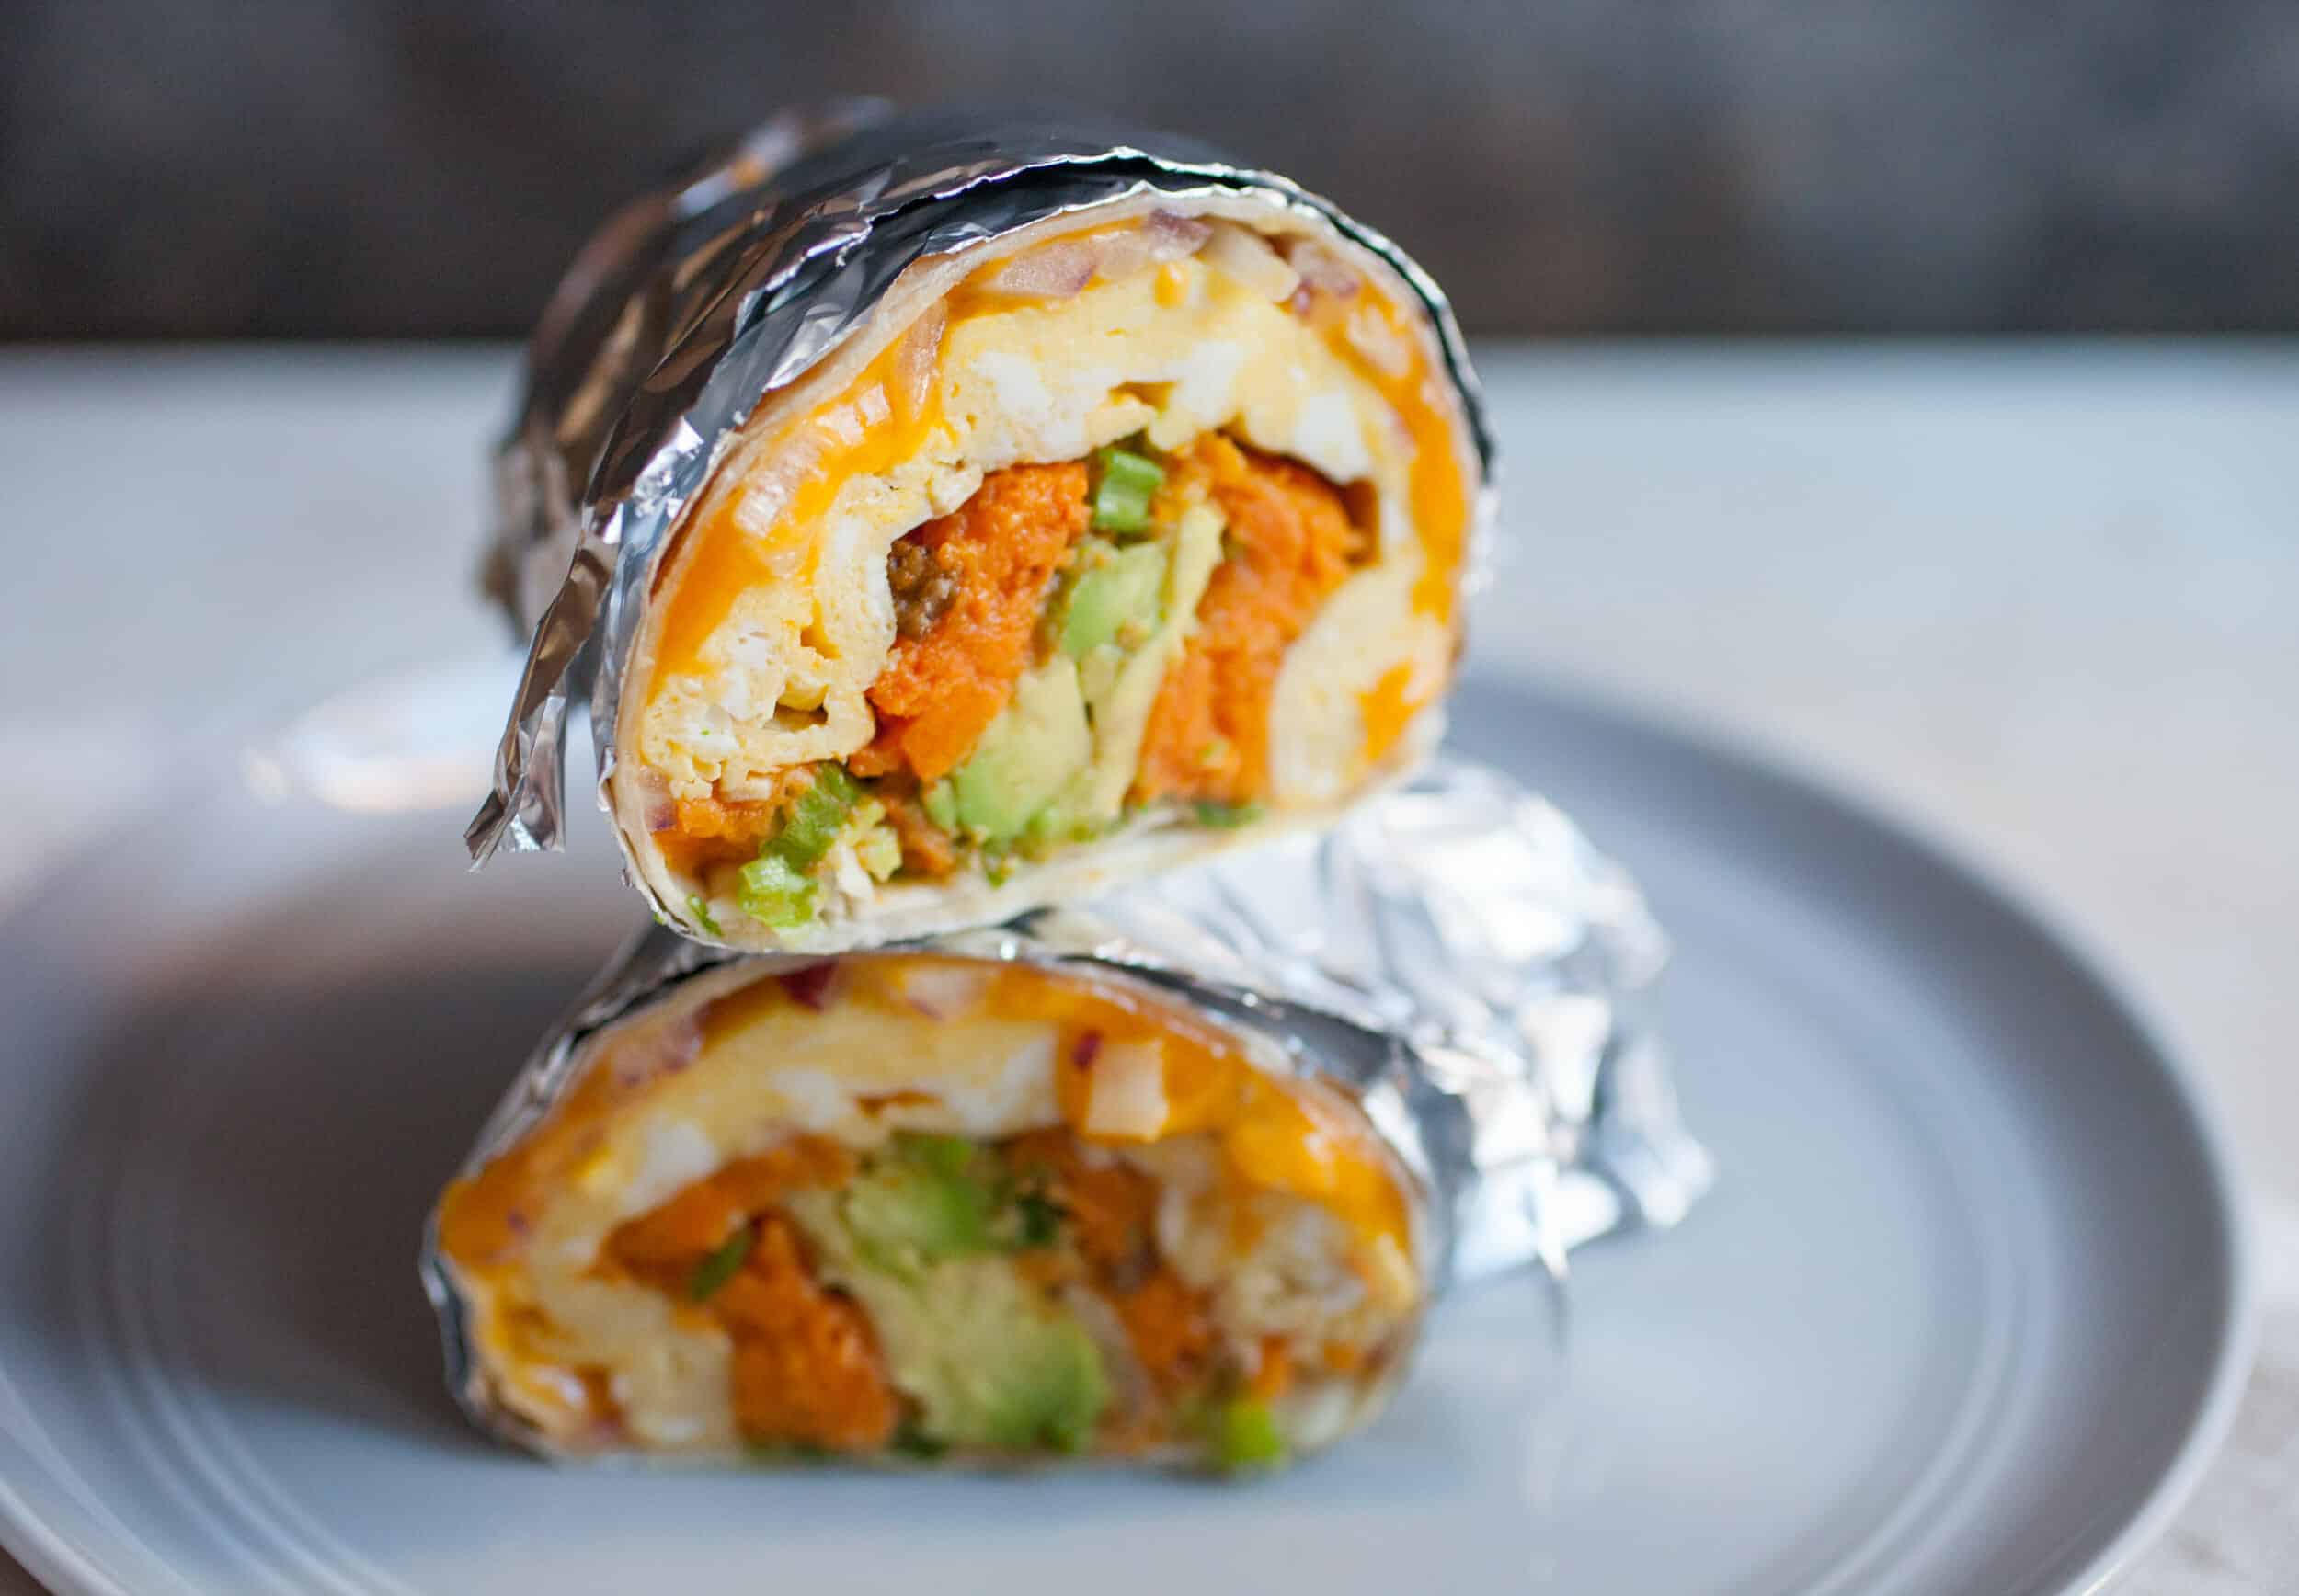 10 Minute Sweet Potato Breakfast Burrito: If you need a filling breakfast in a hurry, look no further than this easy sweet potato breakfast burrito